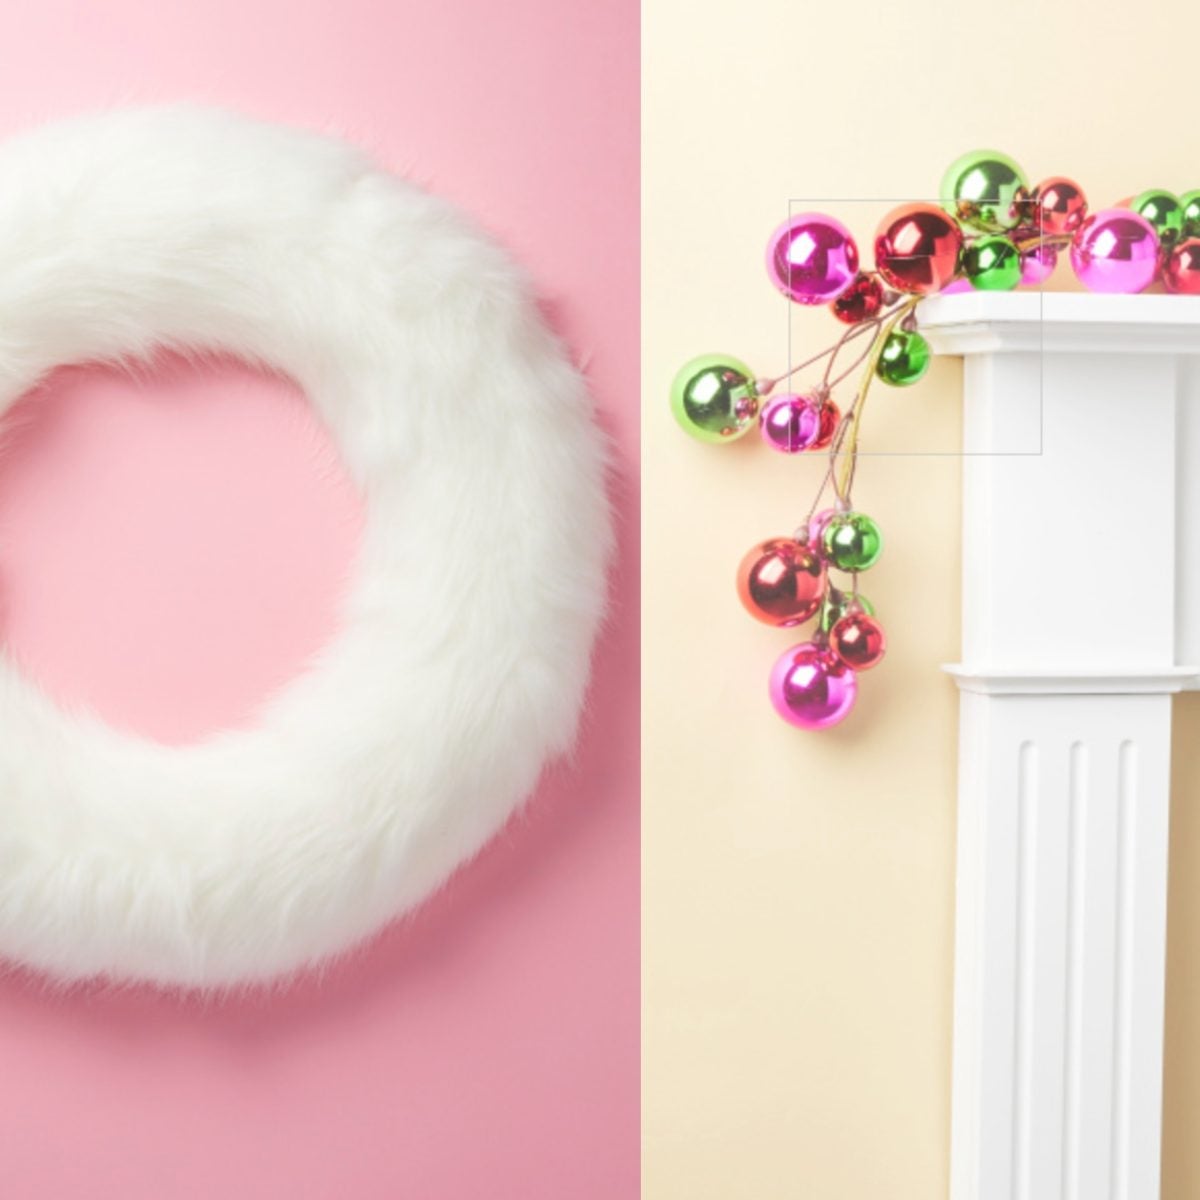 How To Do Holiday Decor But Make It Glam With Help From HomeGoods